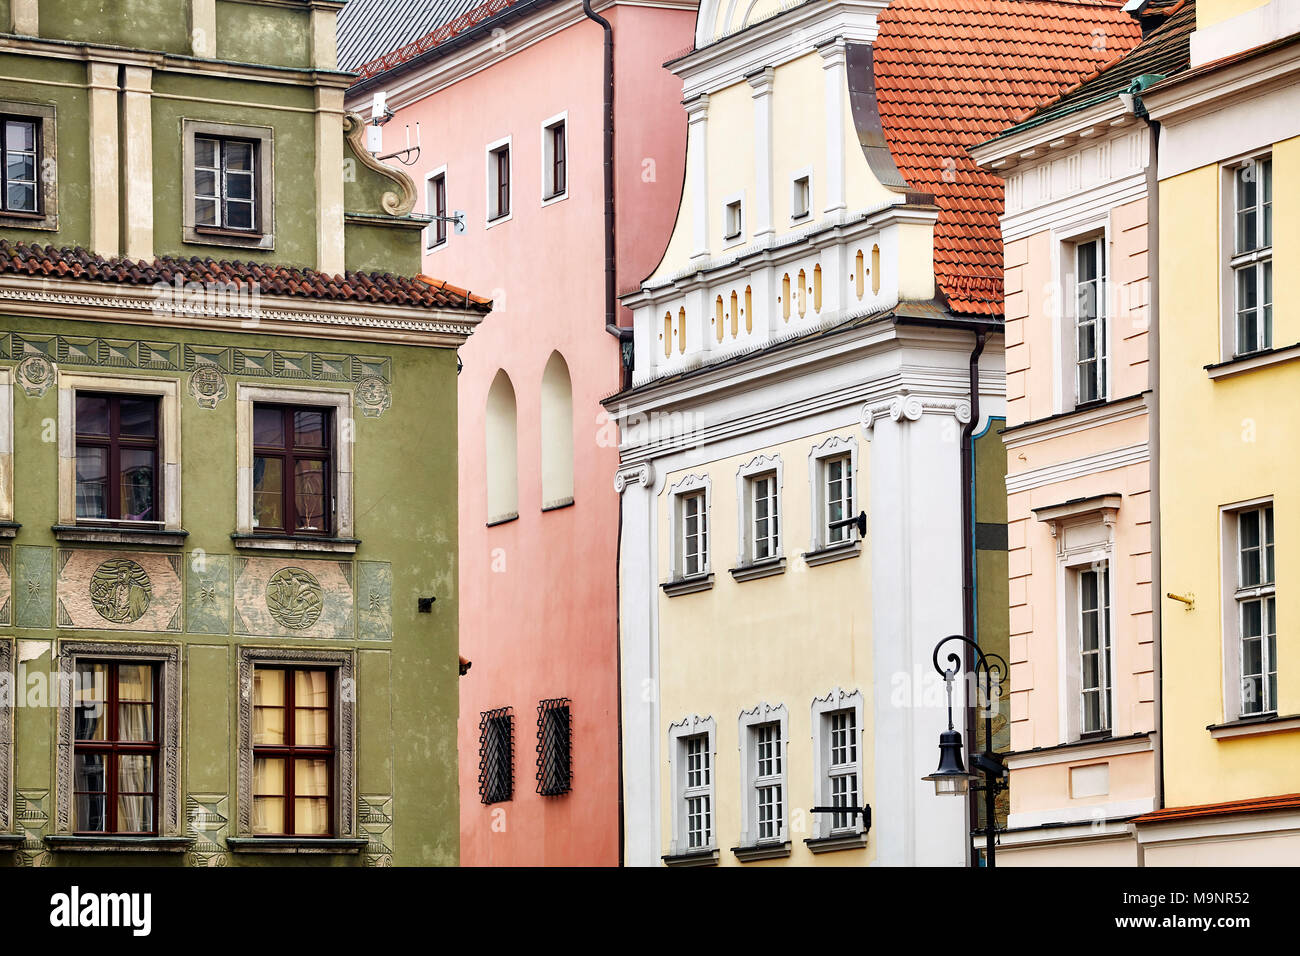 Old buildings facades in the Poznan Old Market Square, Poland. Stock Photo